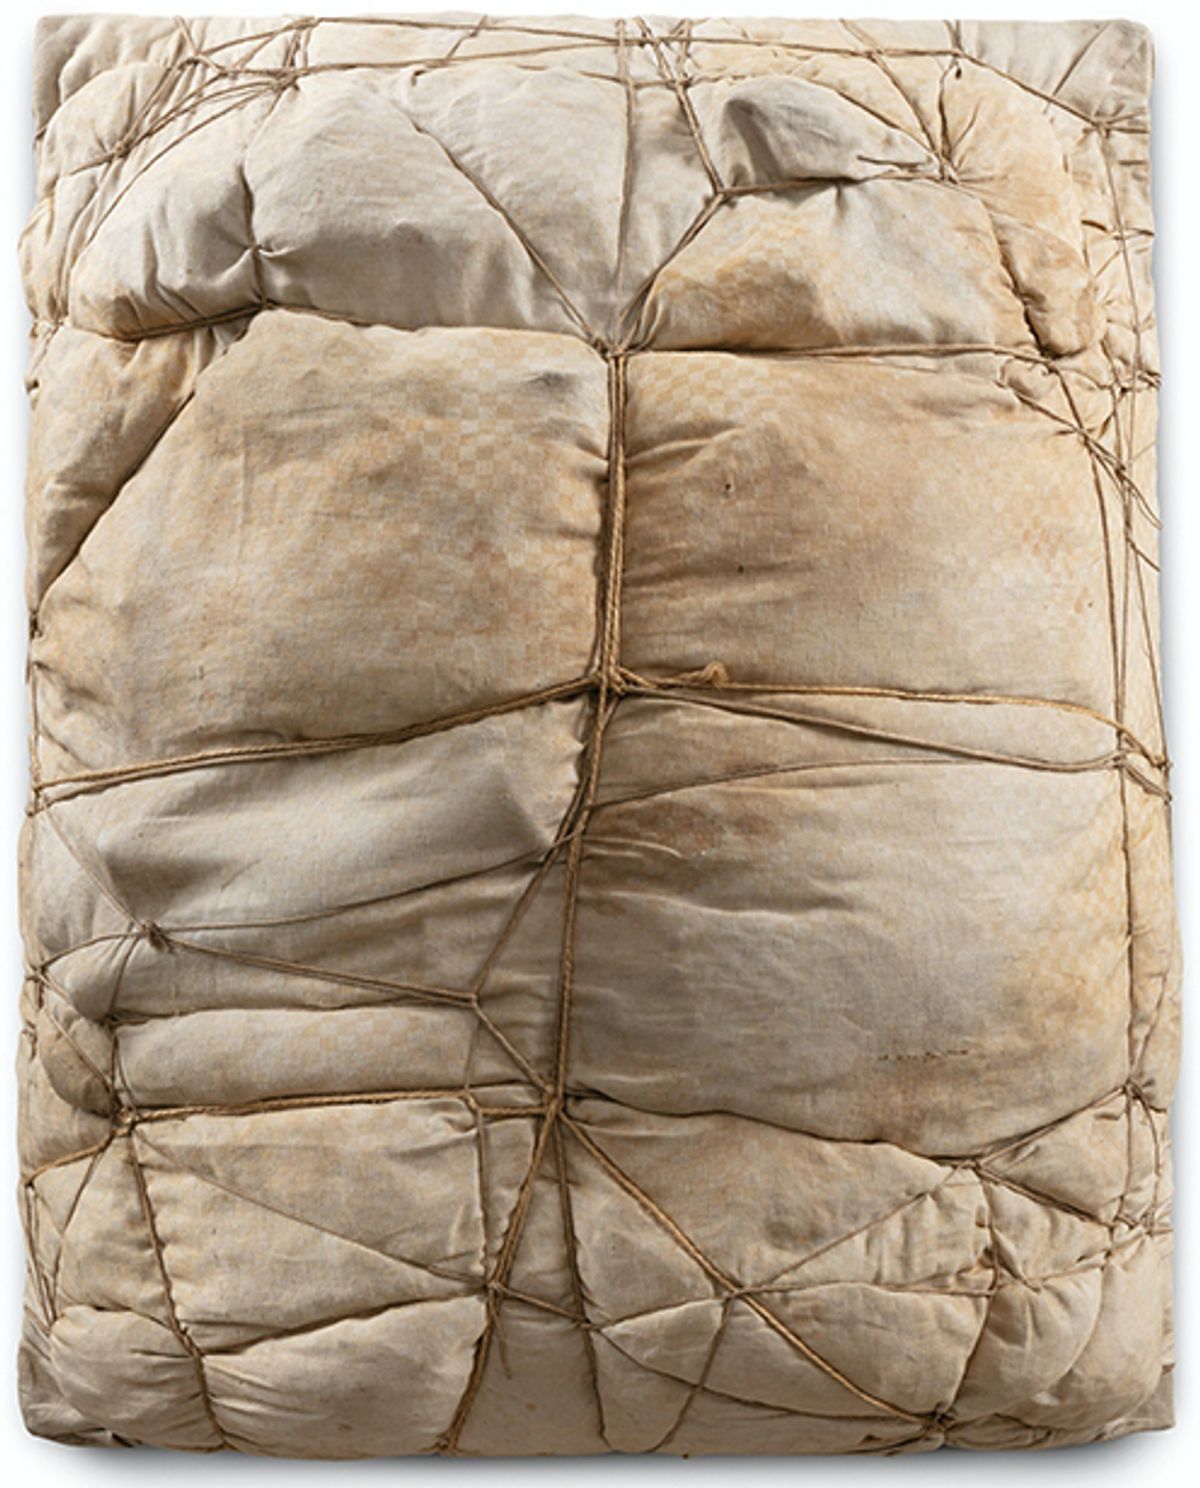 Christo, Package, 1961. Courtesy Sotheby’s